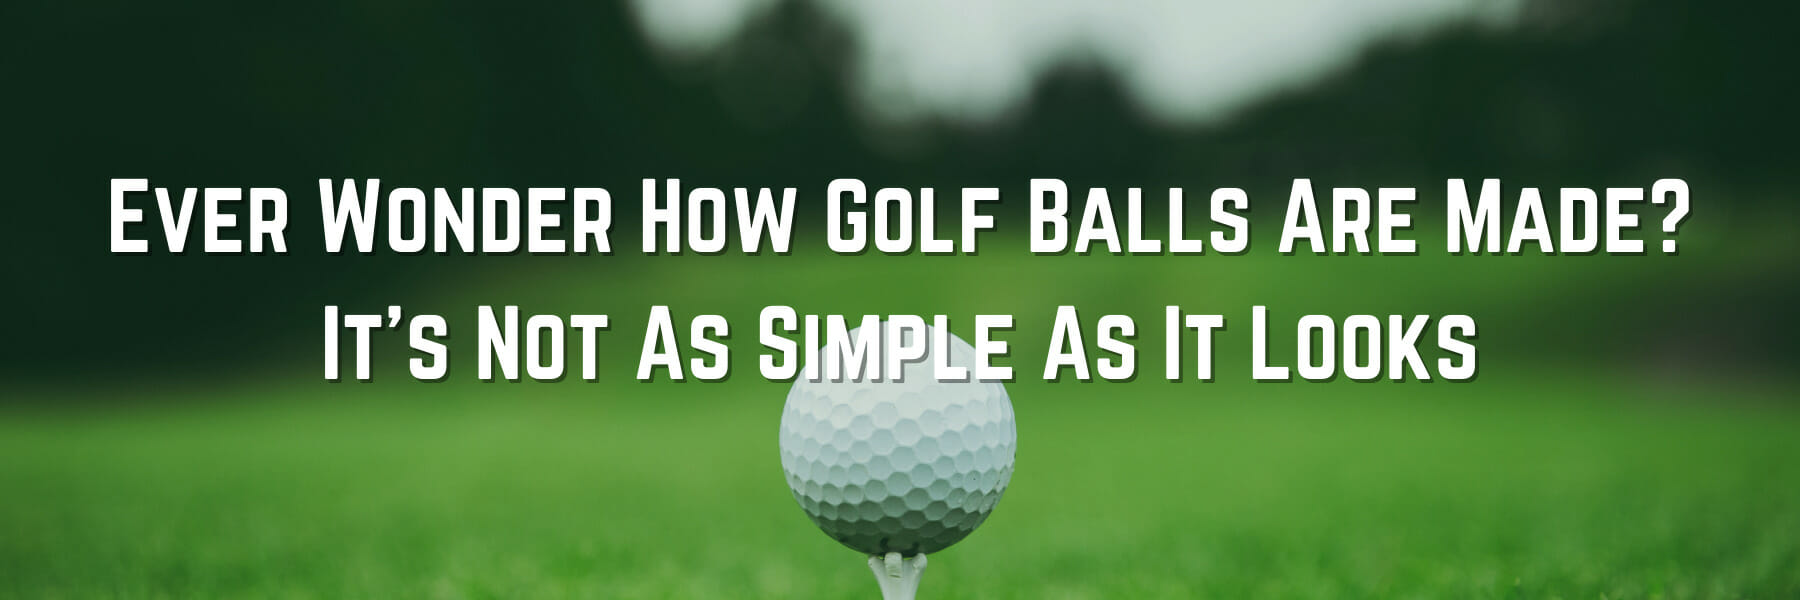 Ever Wonder How Golf Balls Are Made? - It’s Not As Simple As It Looks